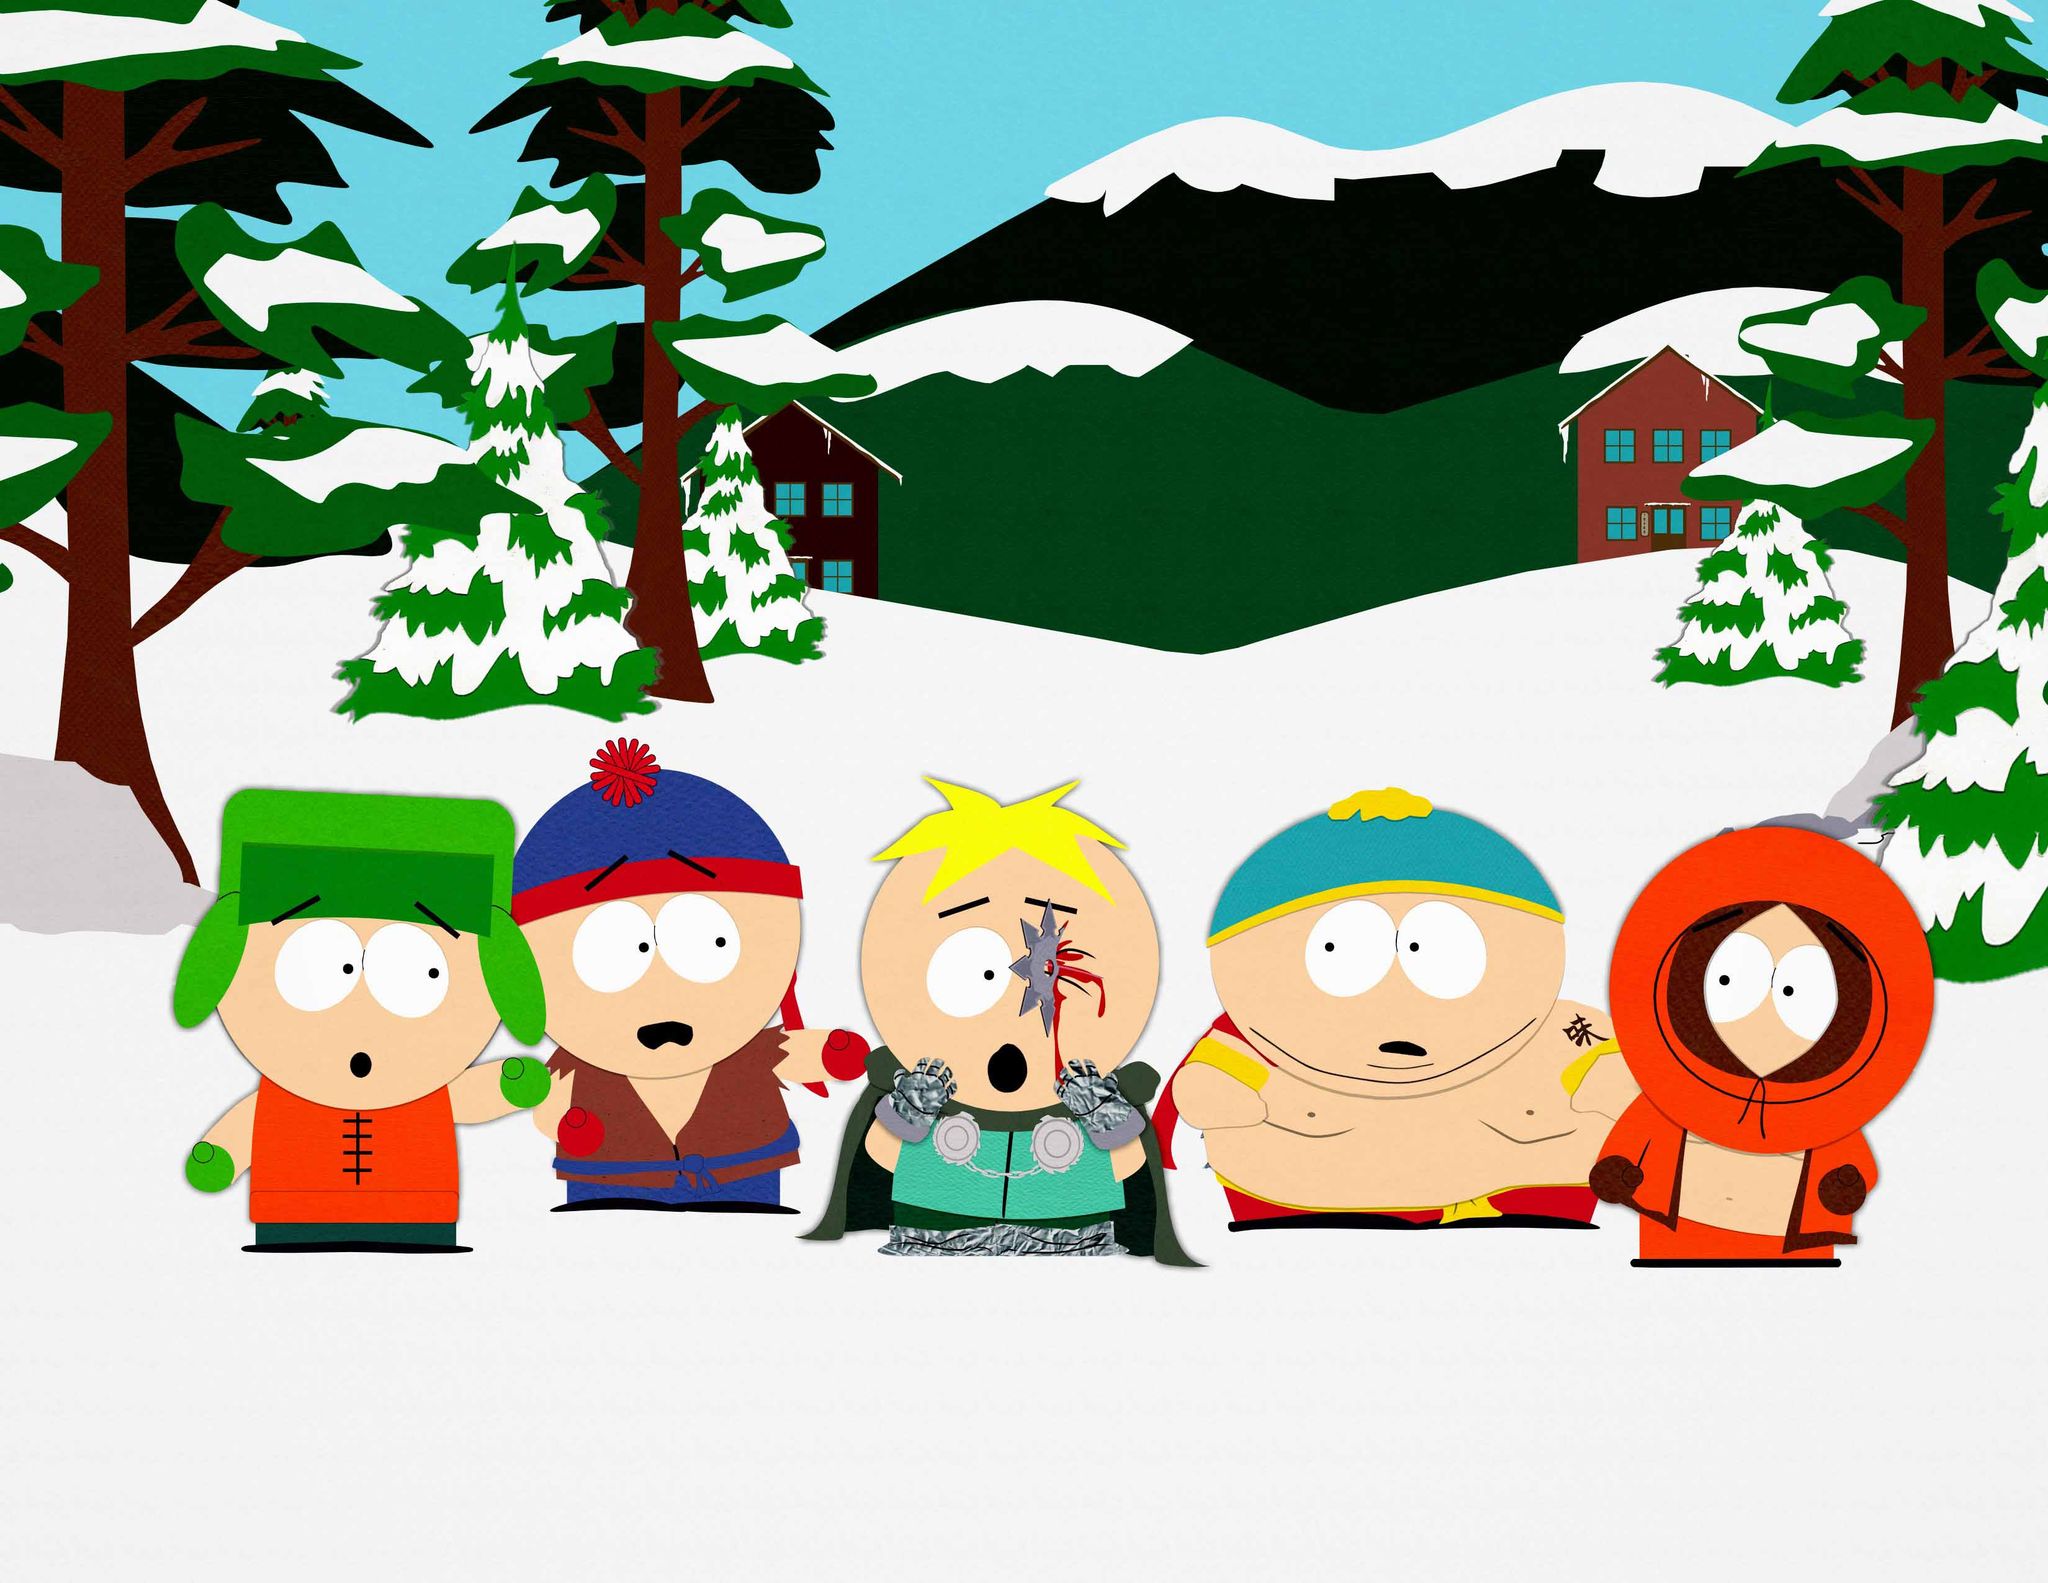 South Park: The 27 most kickass episodes ever